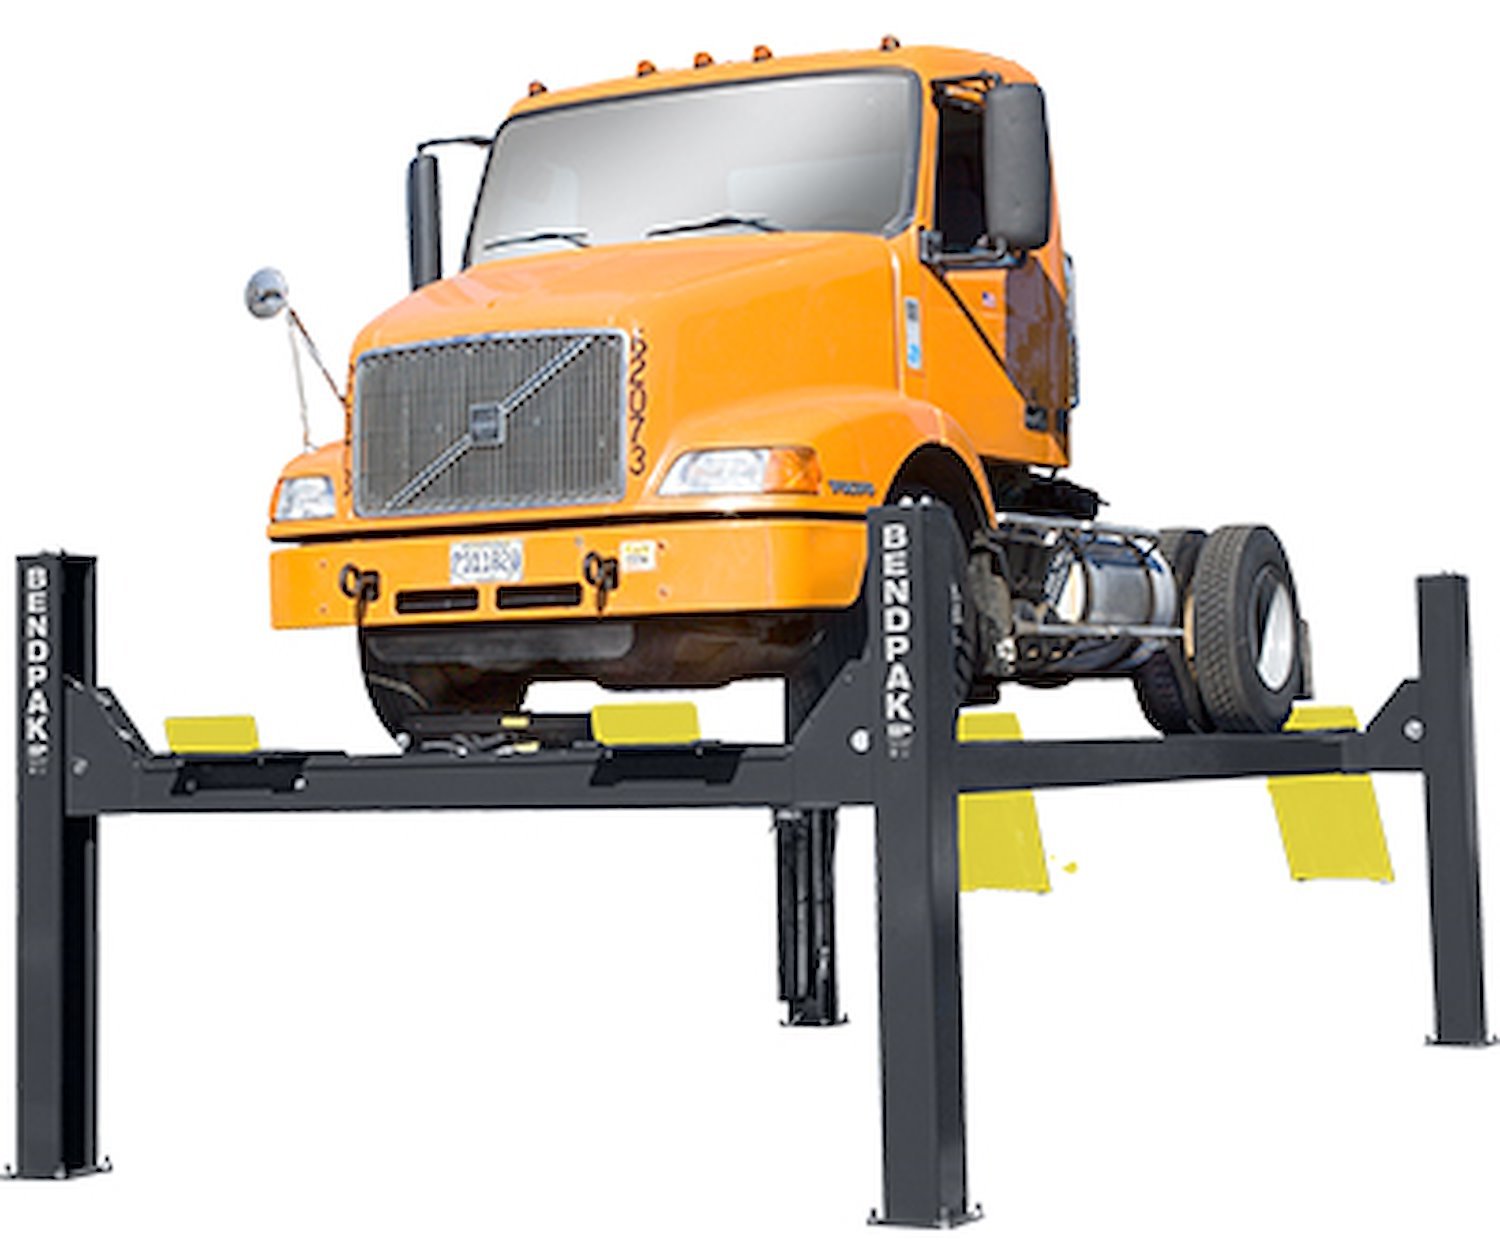 HDS-40X Extended-Length Four-Post Lift, 40,000-lb. Capacity